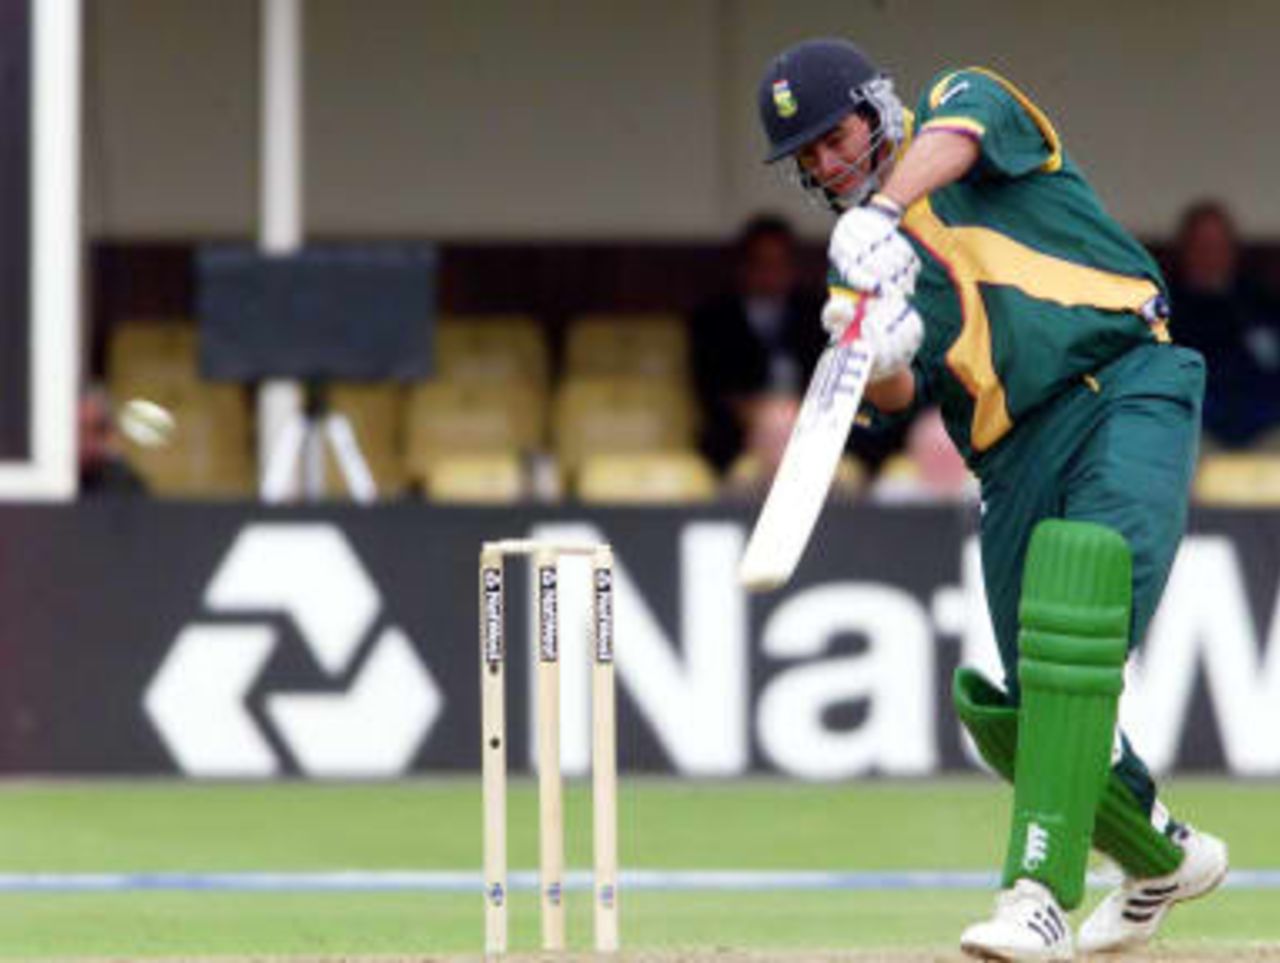 South Africa's captain Hansie Cronje hits a four on his way to 39 r